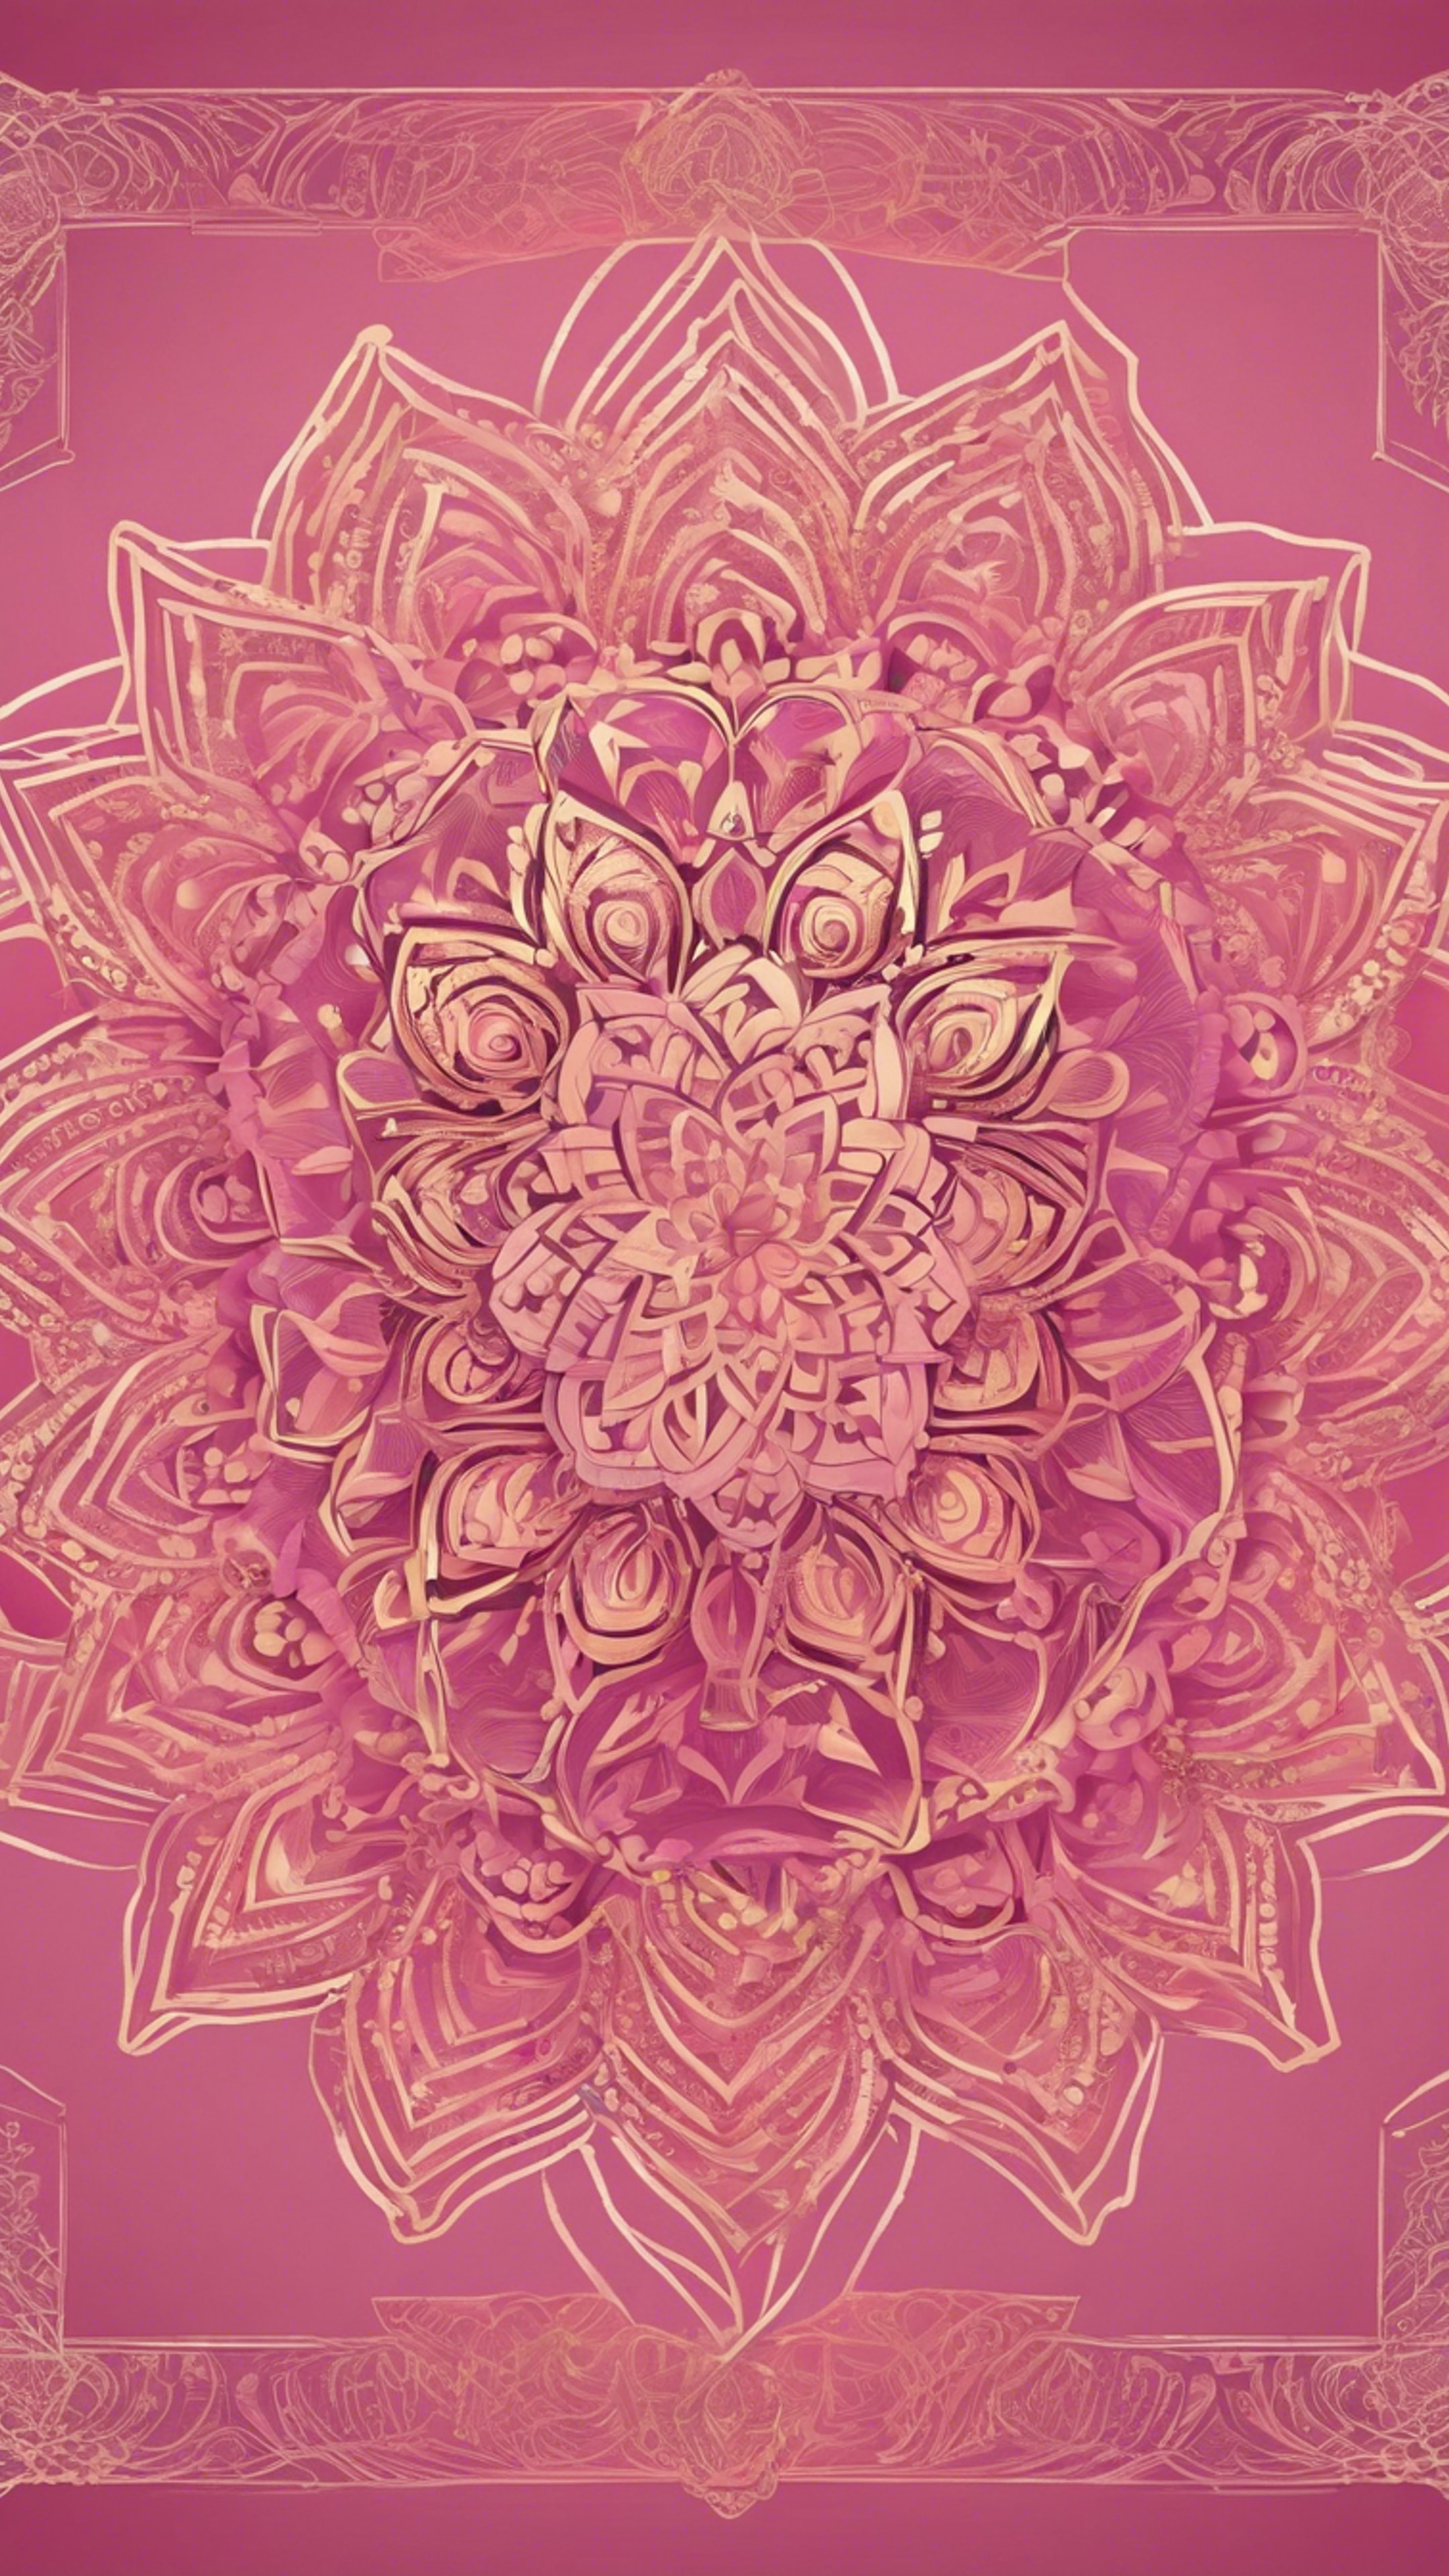 A pink and gold mandala design flourishing with intricate line art and vibrant colors. Wallpaper[7f3fcd6ed997428c89d3]